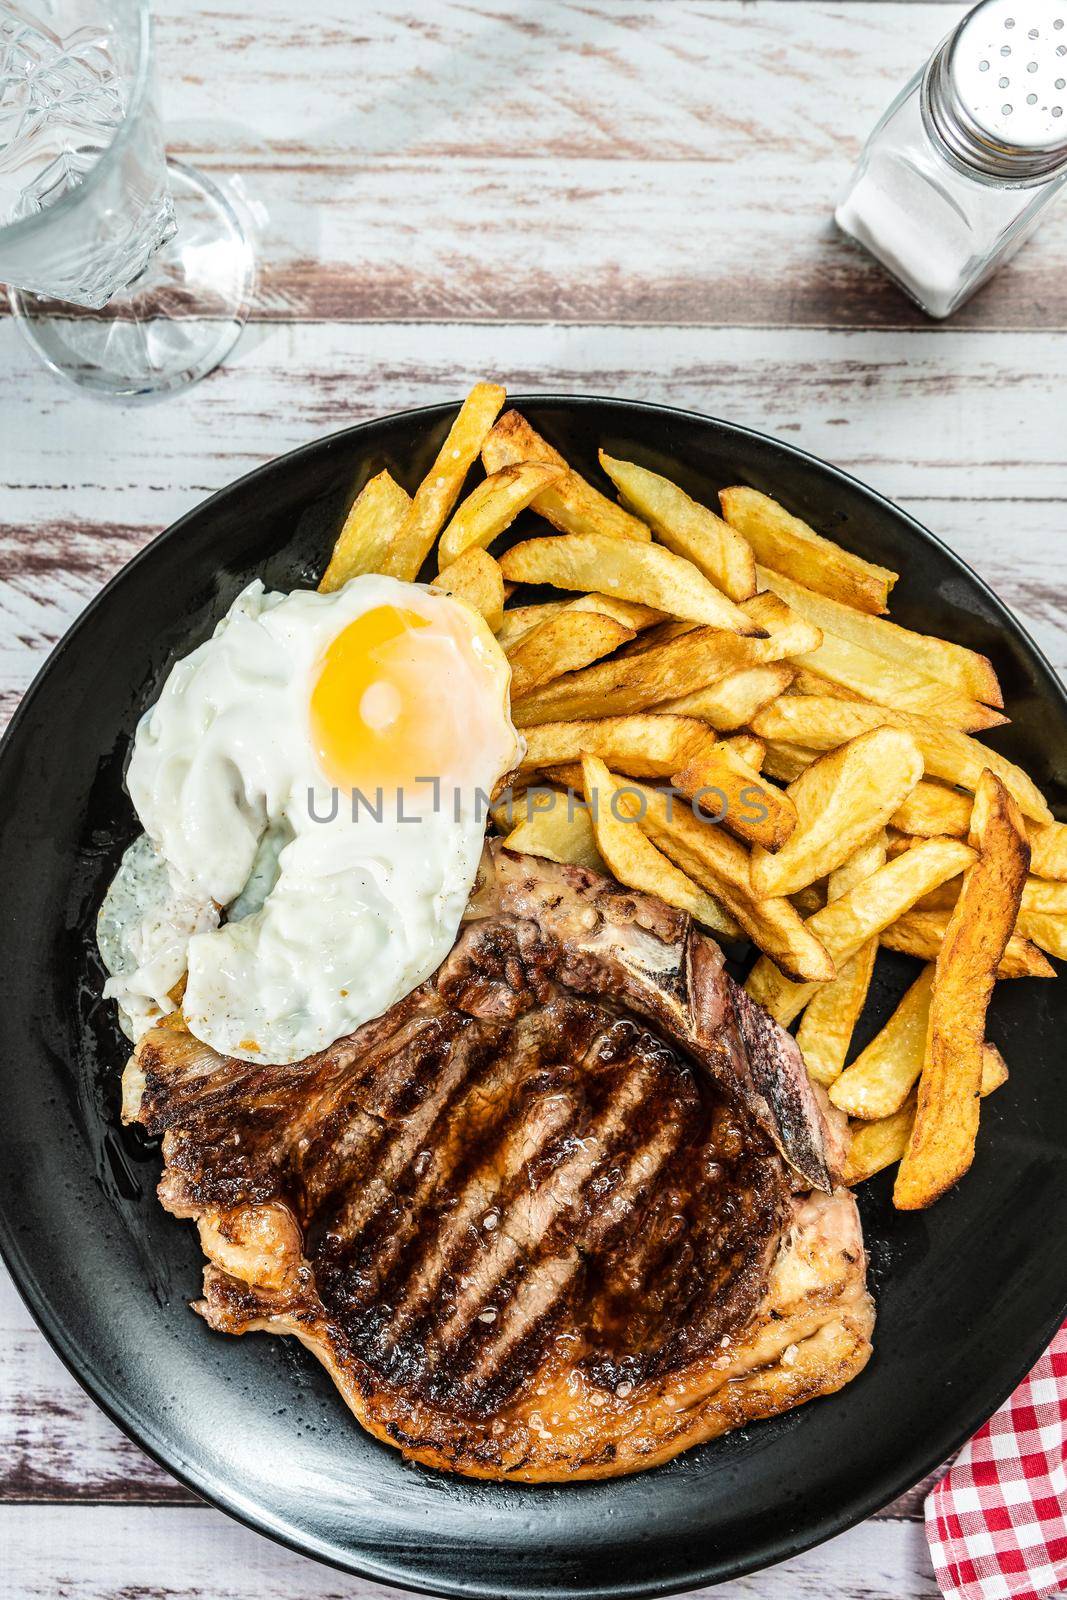 Plate with a juicy t-bone grilled or barbecued, accompanied by a portion of french fries and a fried egg. Traditional, homemade food concept. vertical orientation. by hdcaputo